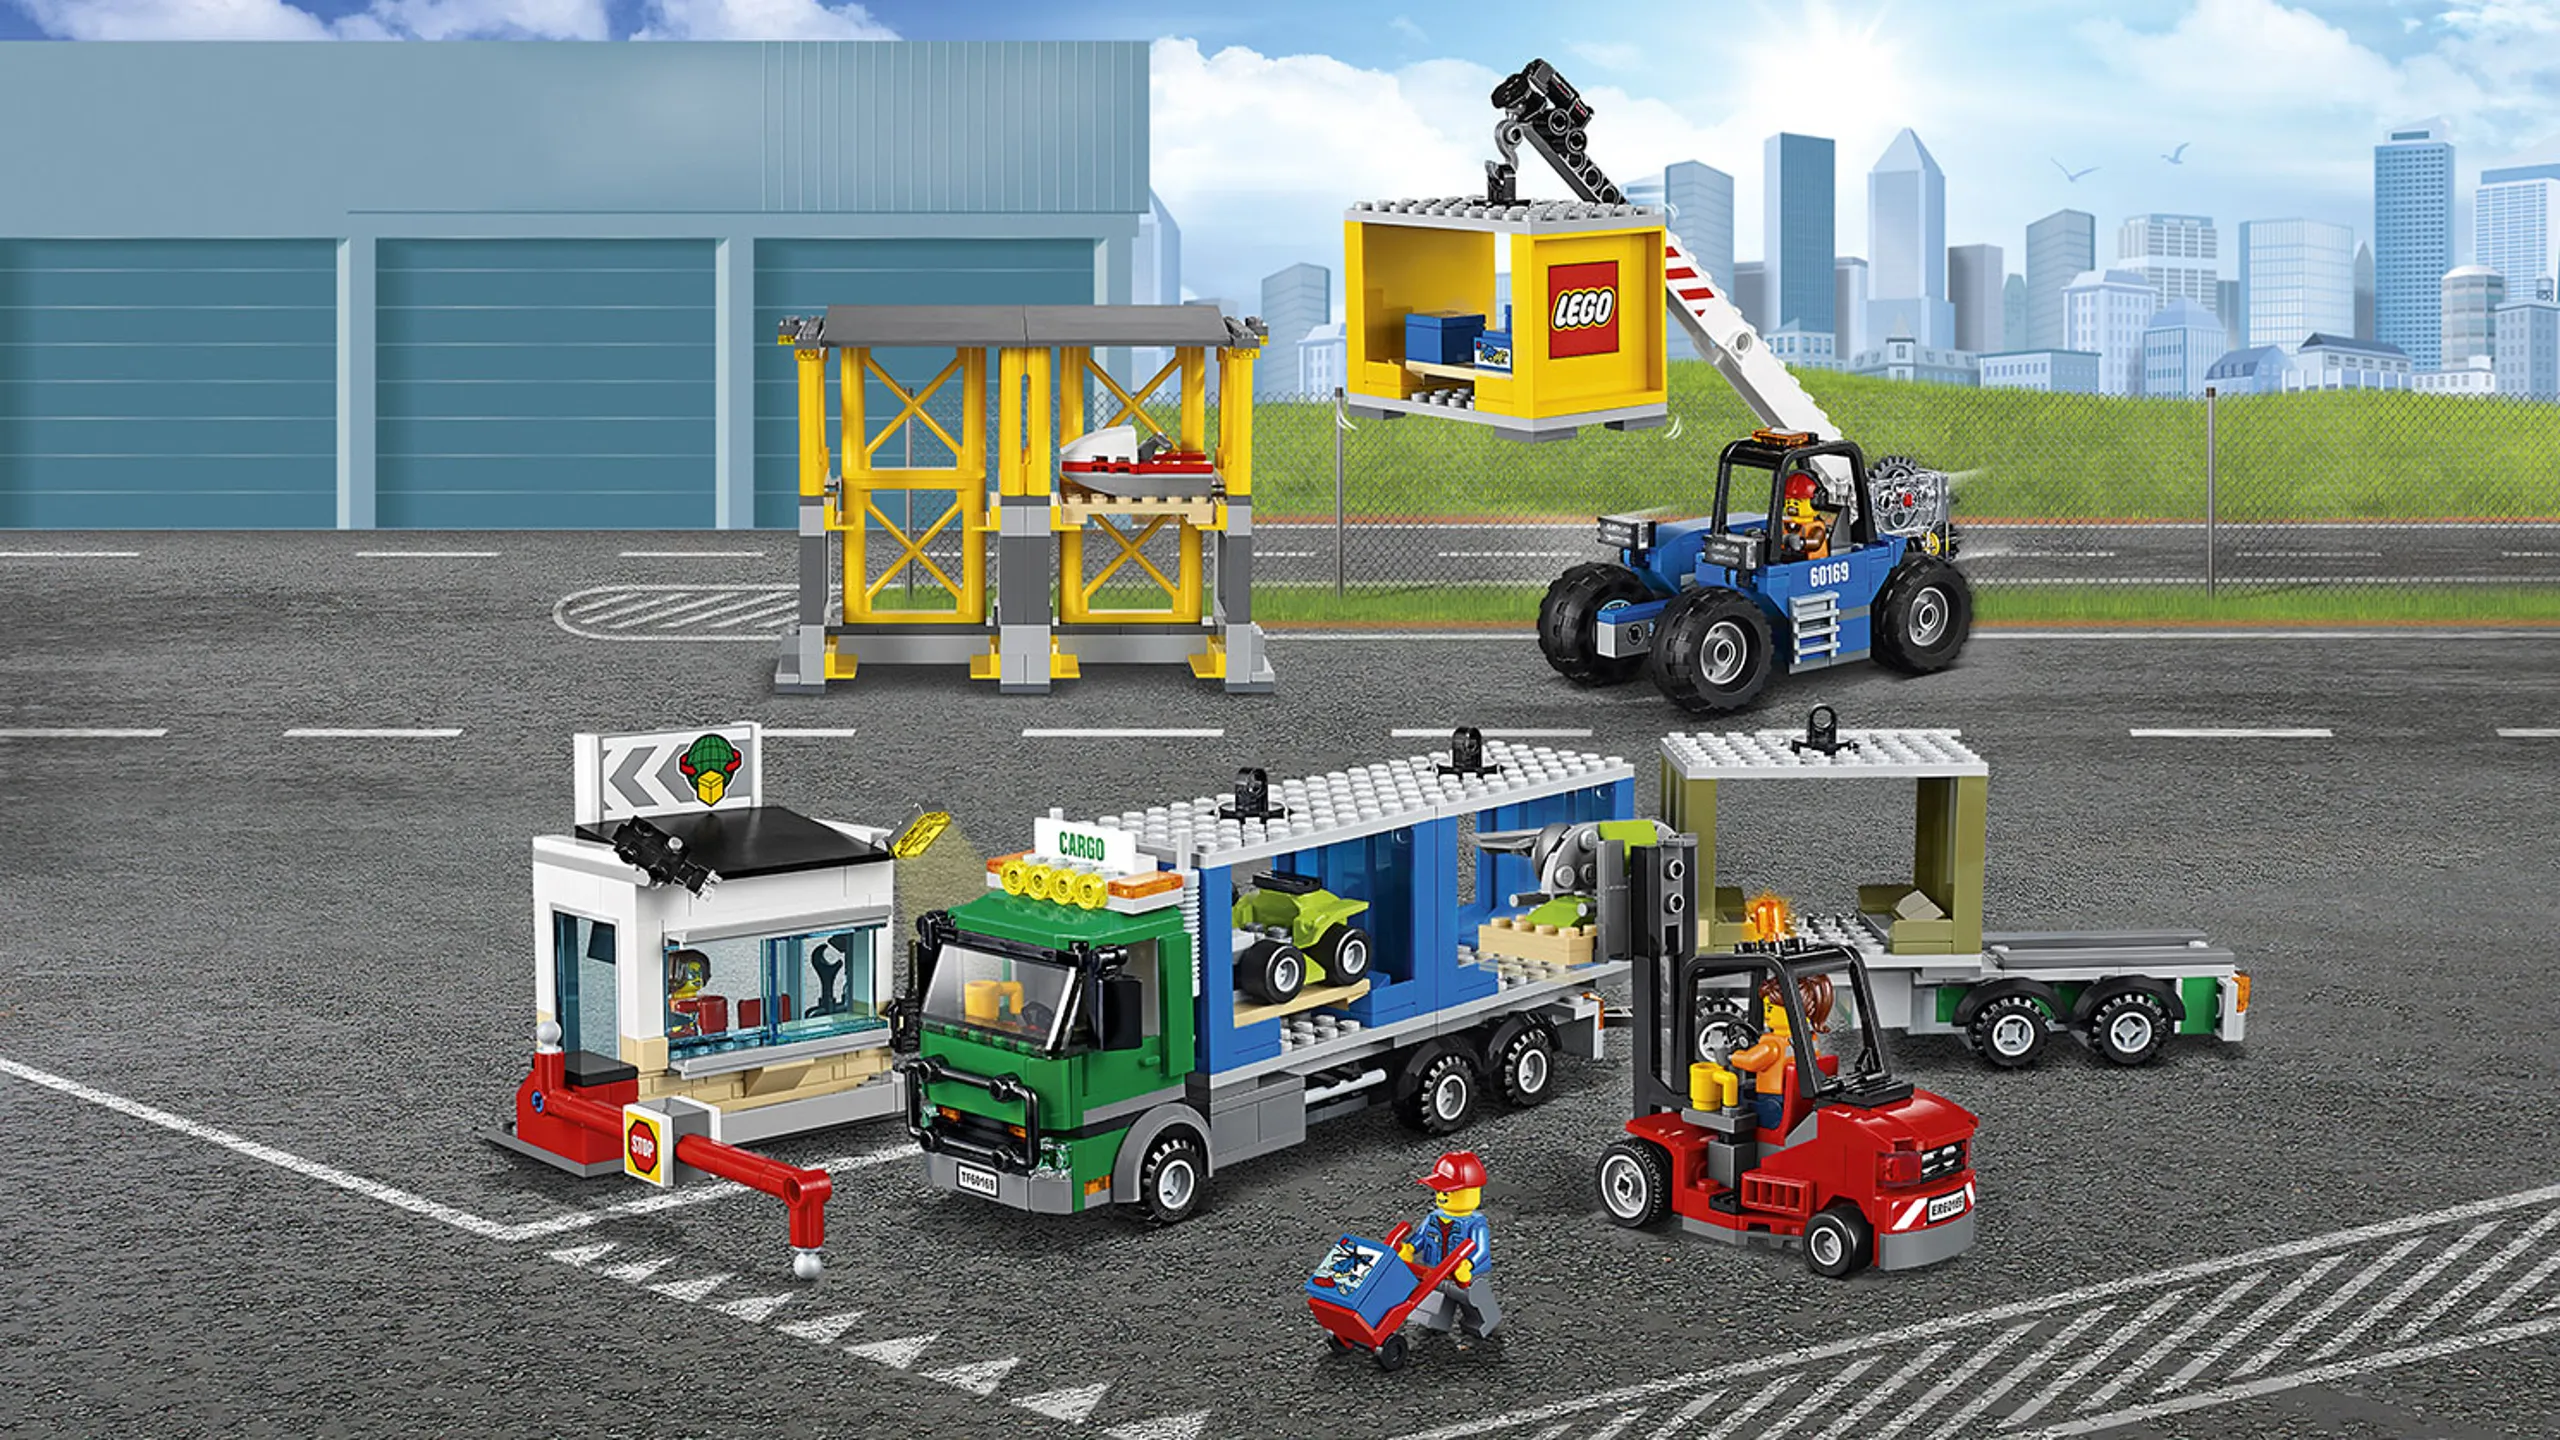 LEGO City Town - 60169 Cargo Terminal - Use the forklift to take the pallets off the truck and into the containers at the Cargo Terminal.